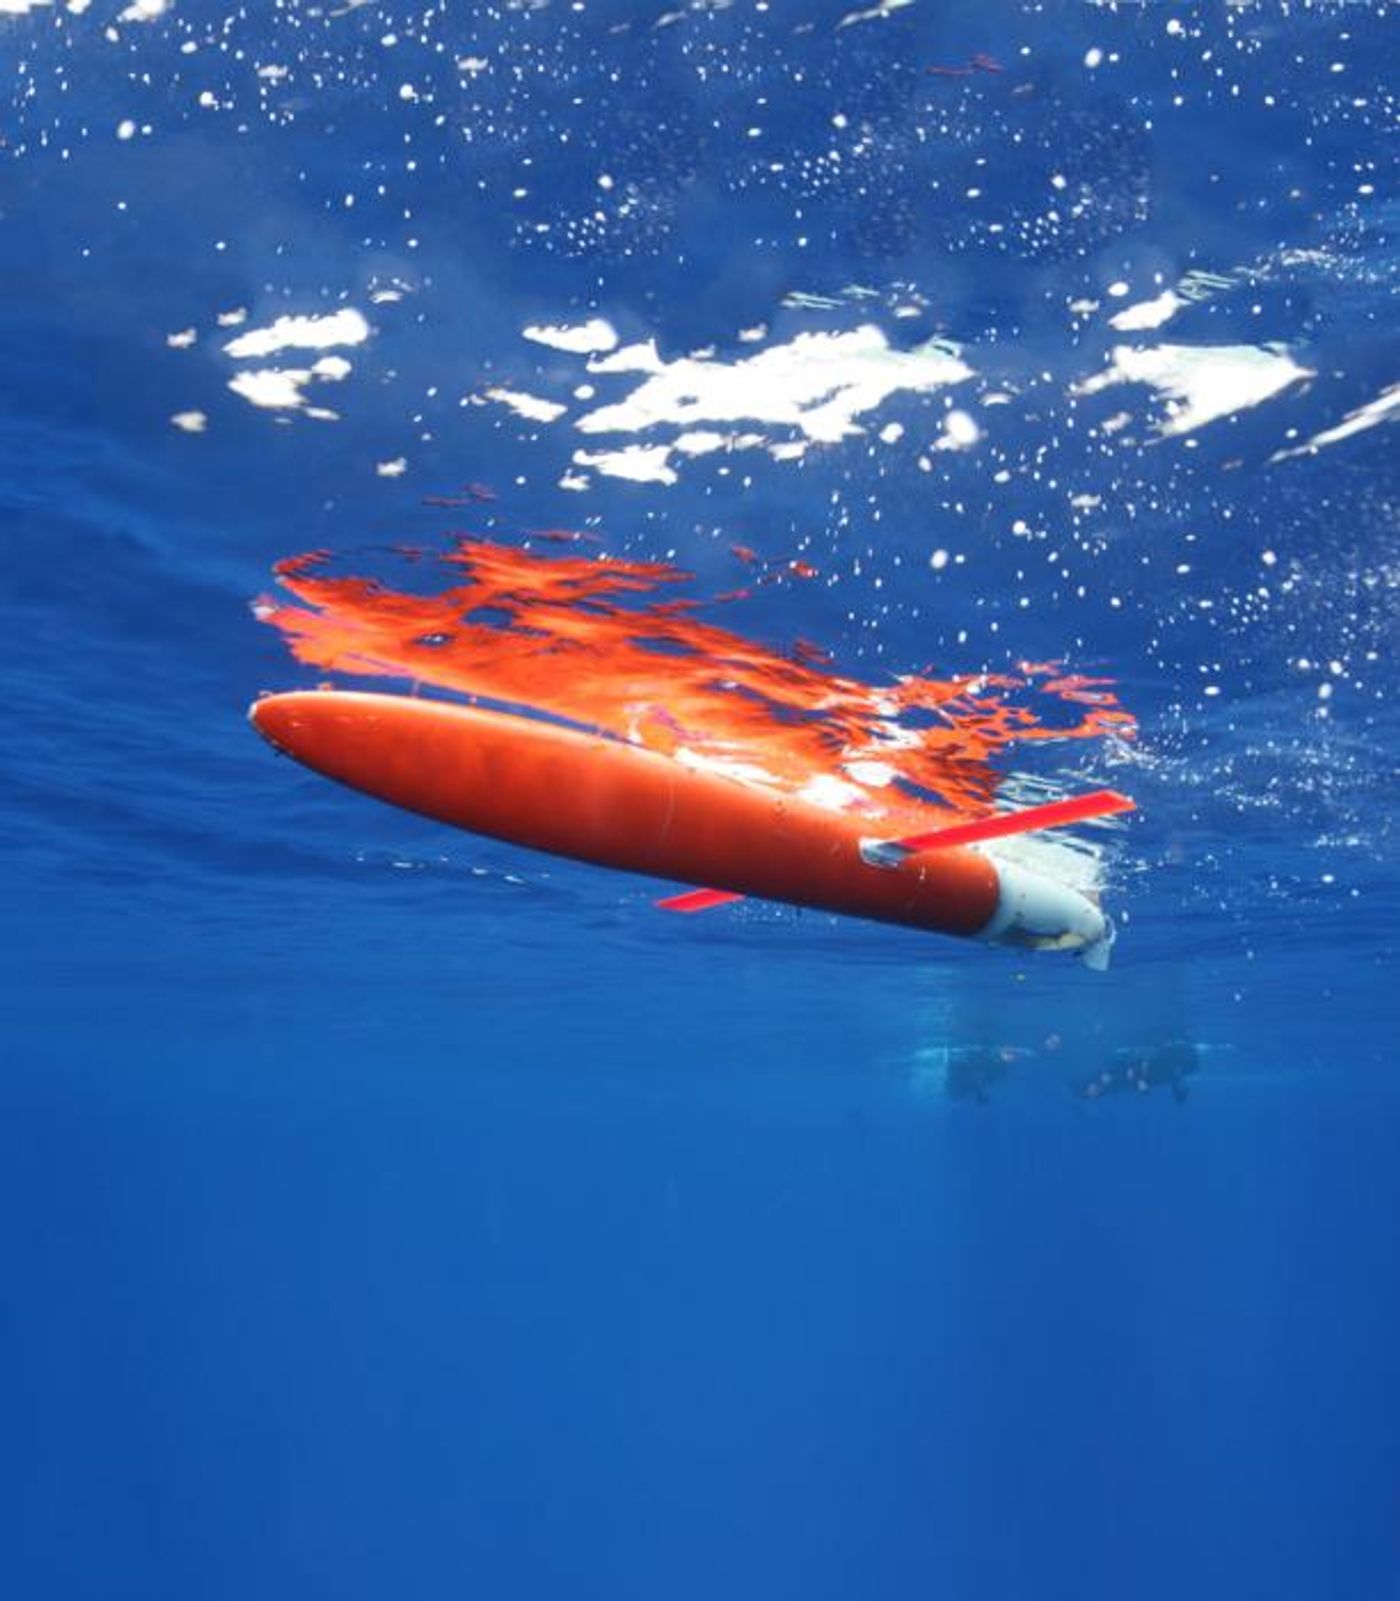 WHOI oceanographers launch Spray gliders, which provide measurements below the surface of the Gulf Stream, and complement satellites that routinely measure water temperature at the ocean surface.  Credit  Photo by Robert Todd/© Woods Hole Oceanographic Institution